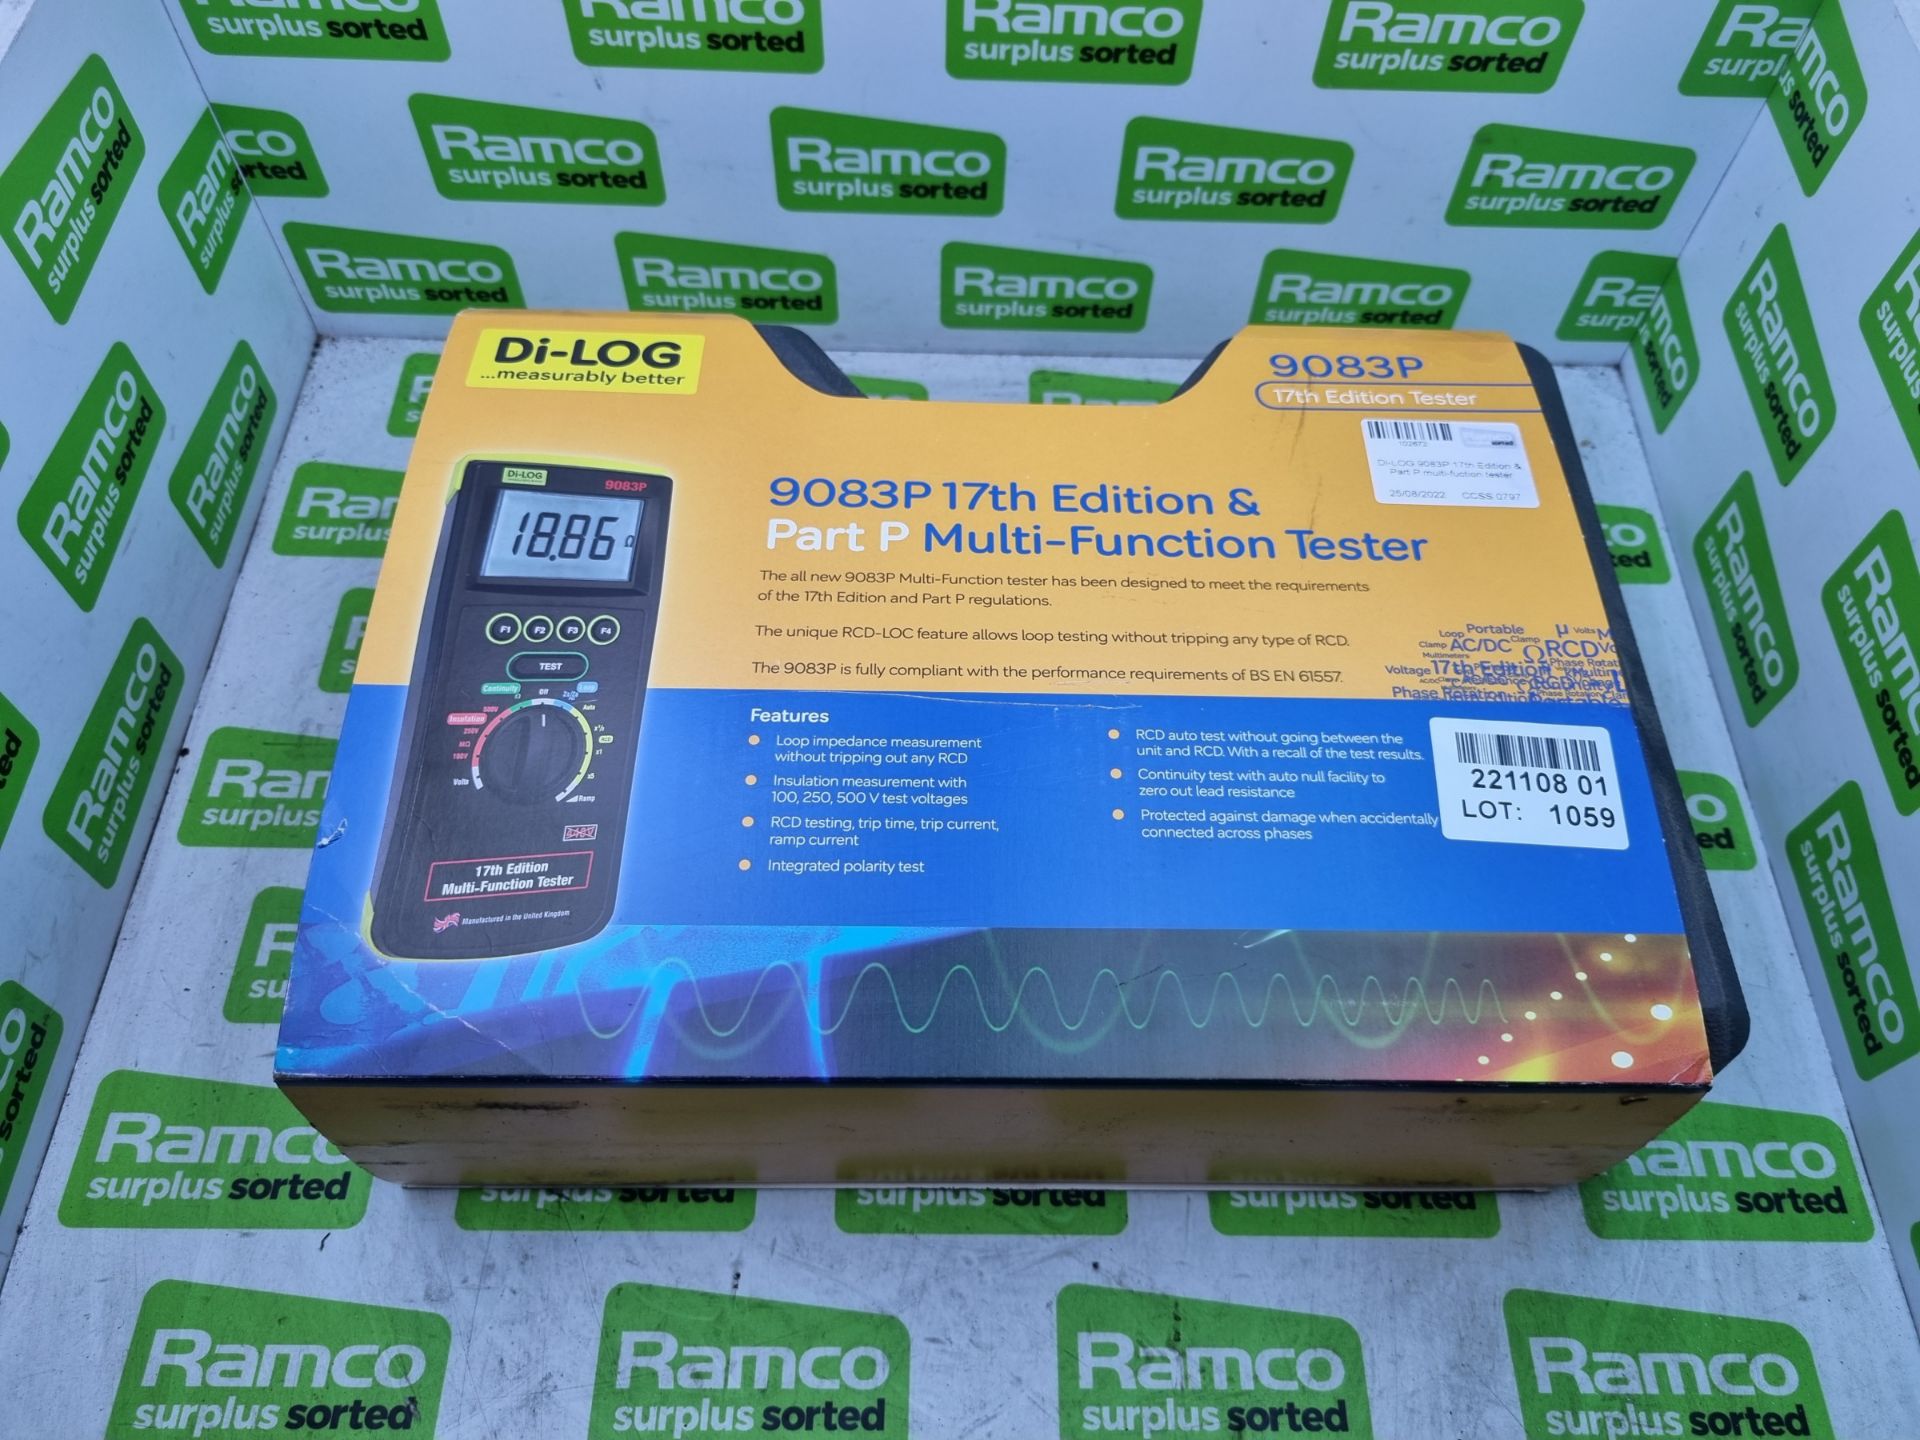 Di-LOG 9083P 17th Edition & Part P multi-function tester